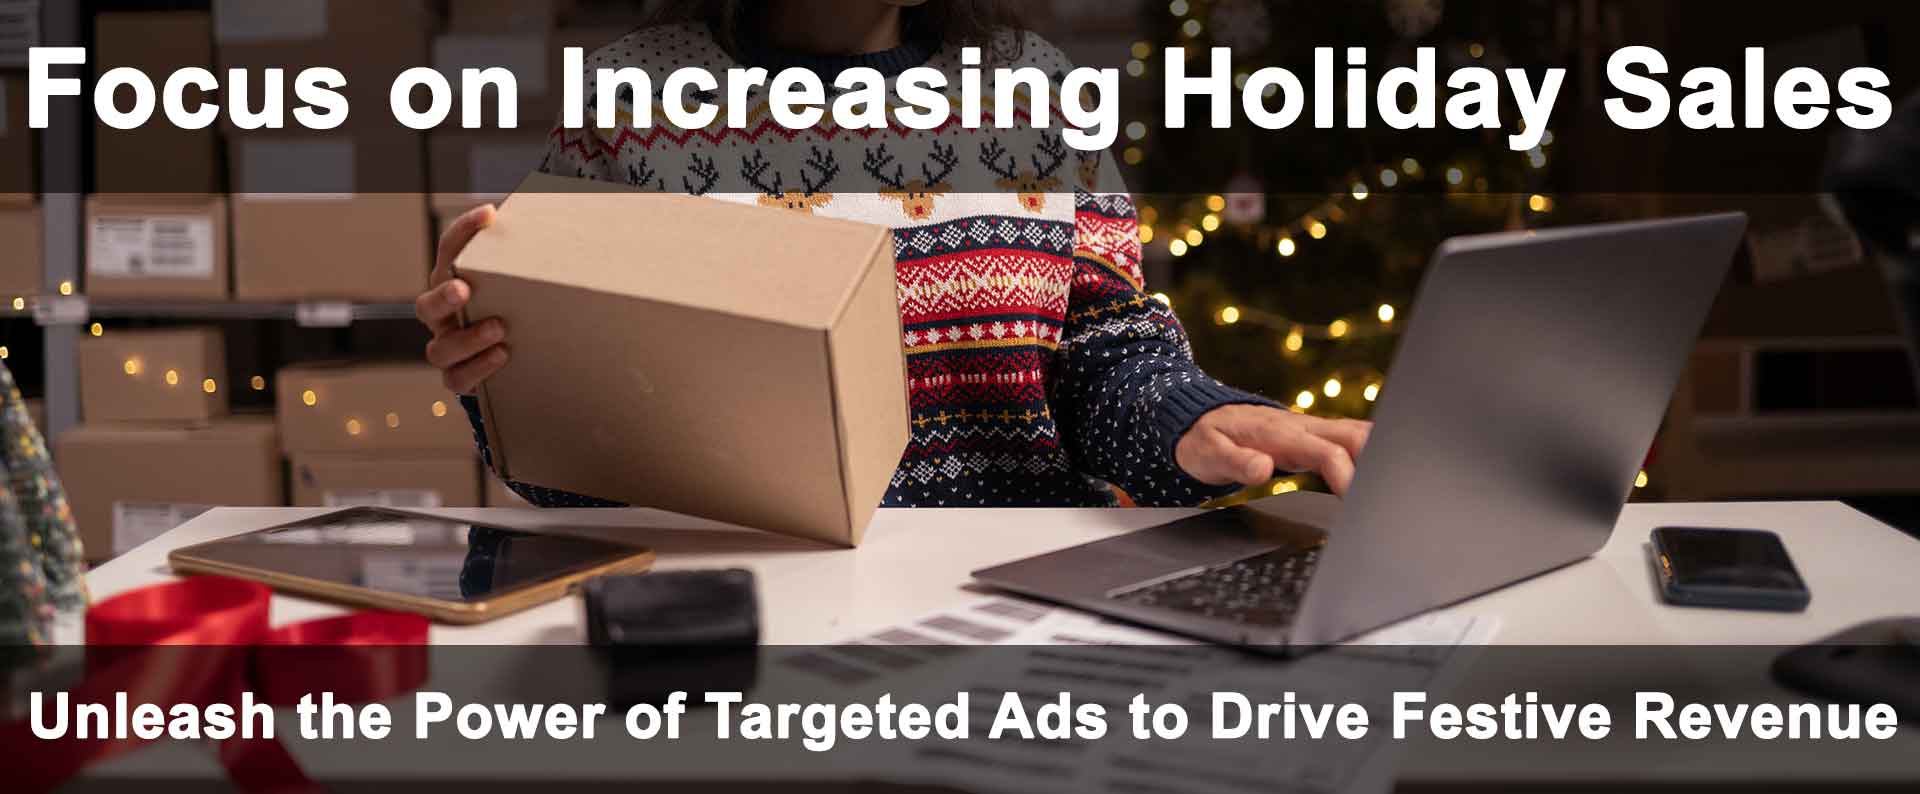 Unleash the Power of Targeted Ads to Drive Festive Revenue